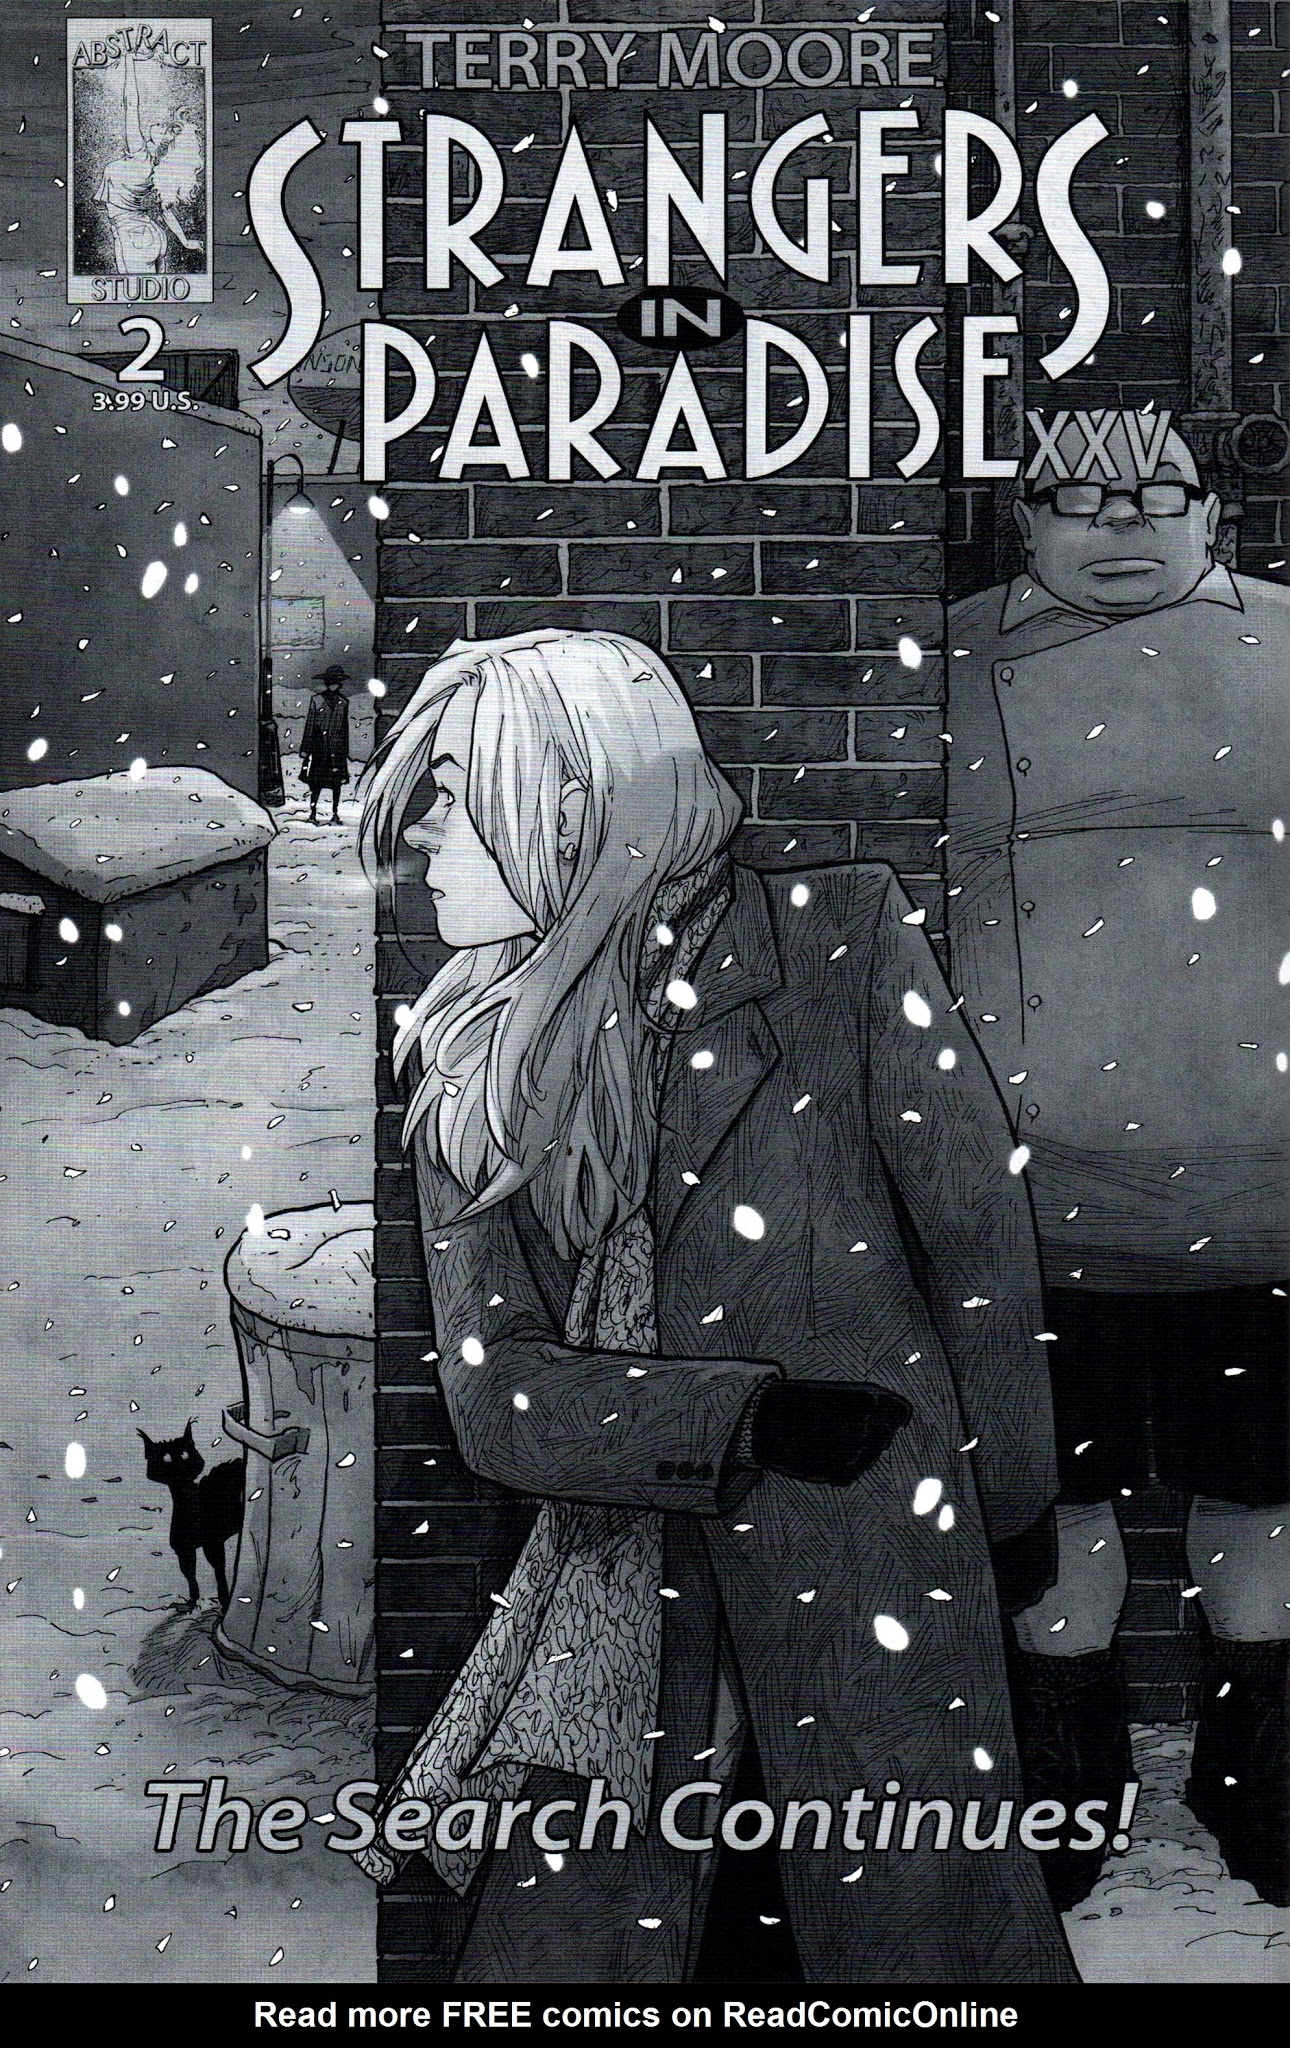 Read online Free Comic Book Day 2018 comic -  Issue # Strangers in Paradise - 22